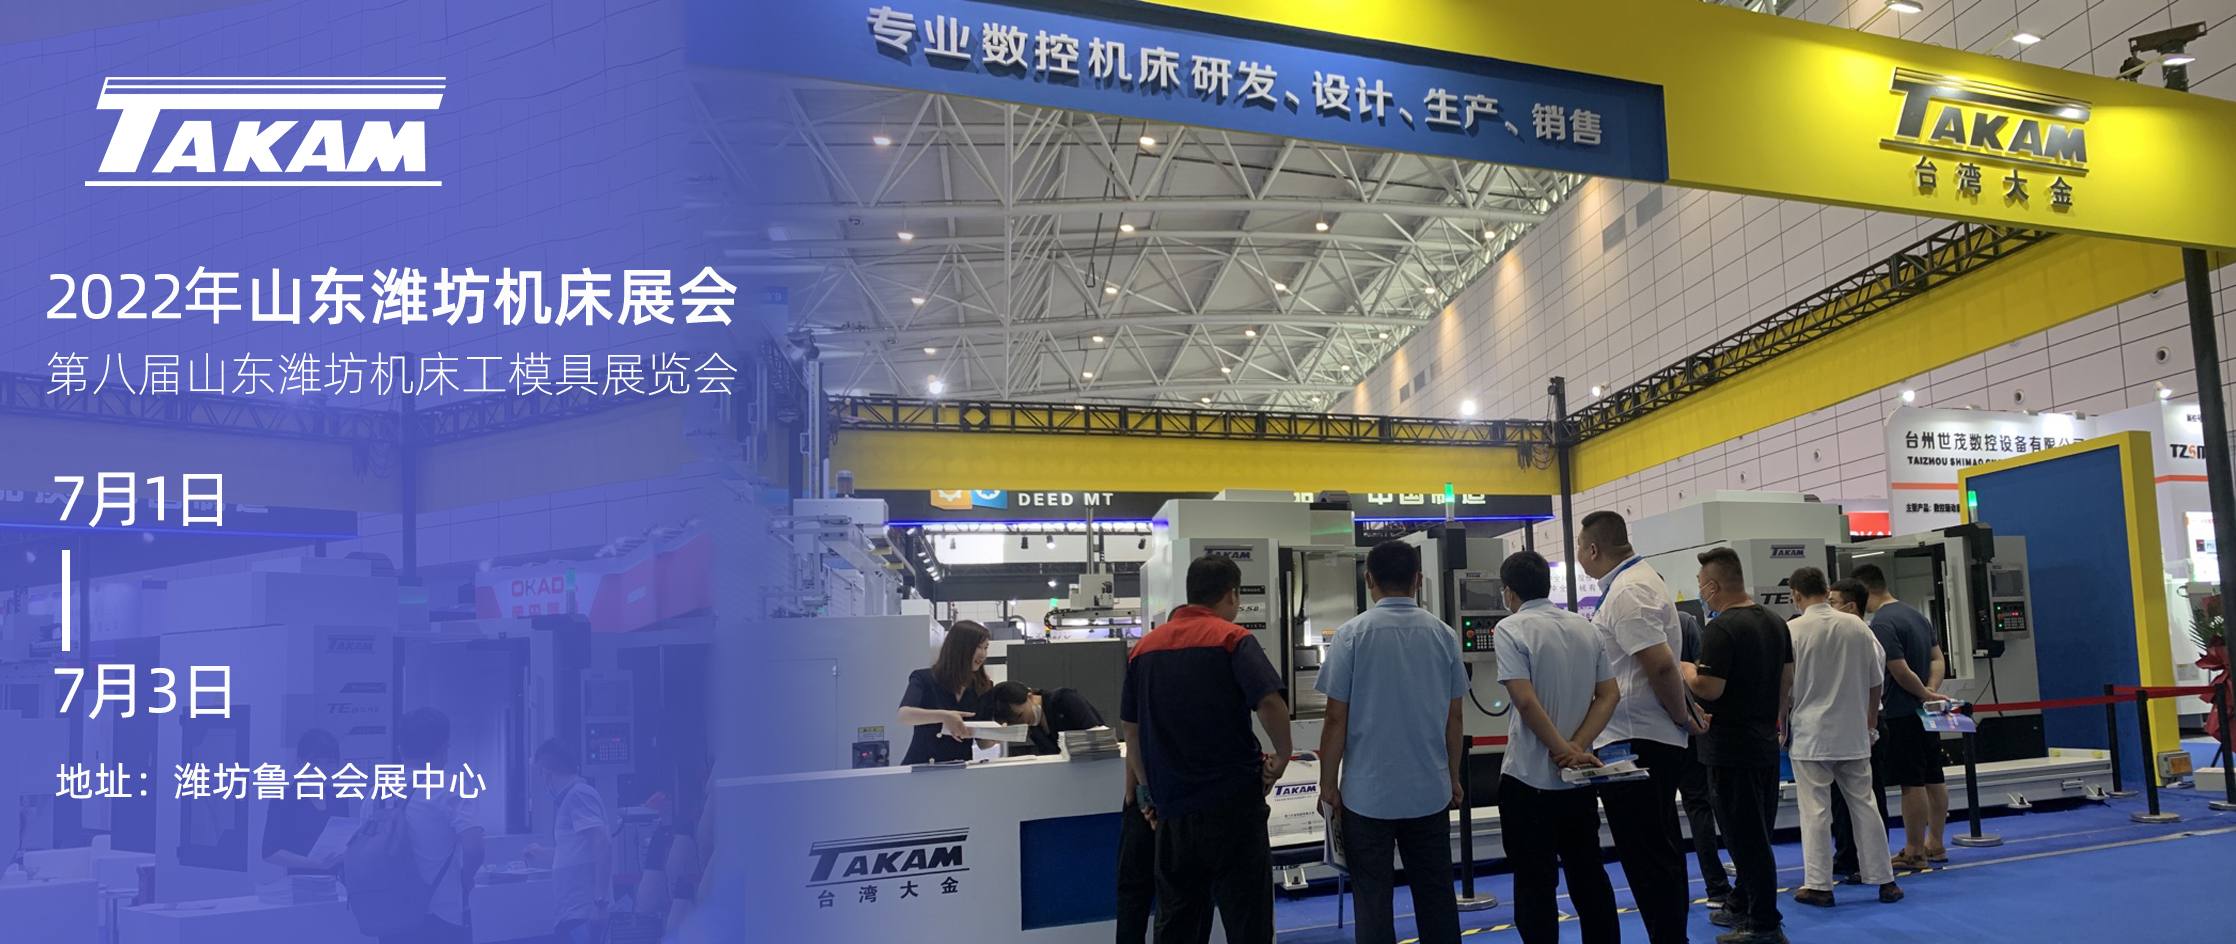 Dajincheng invites you to attend the 8th Shandong (Weifang) machine tool & die exhibition in 2022